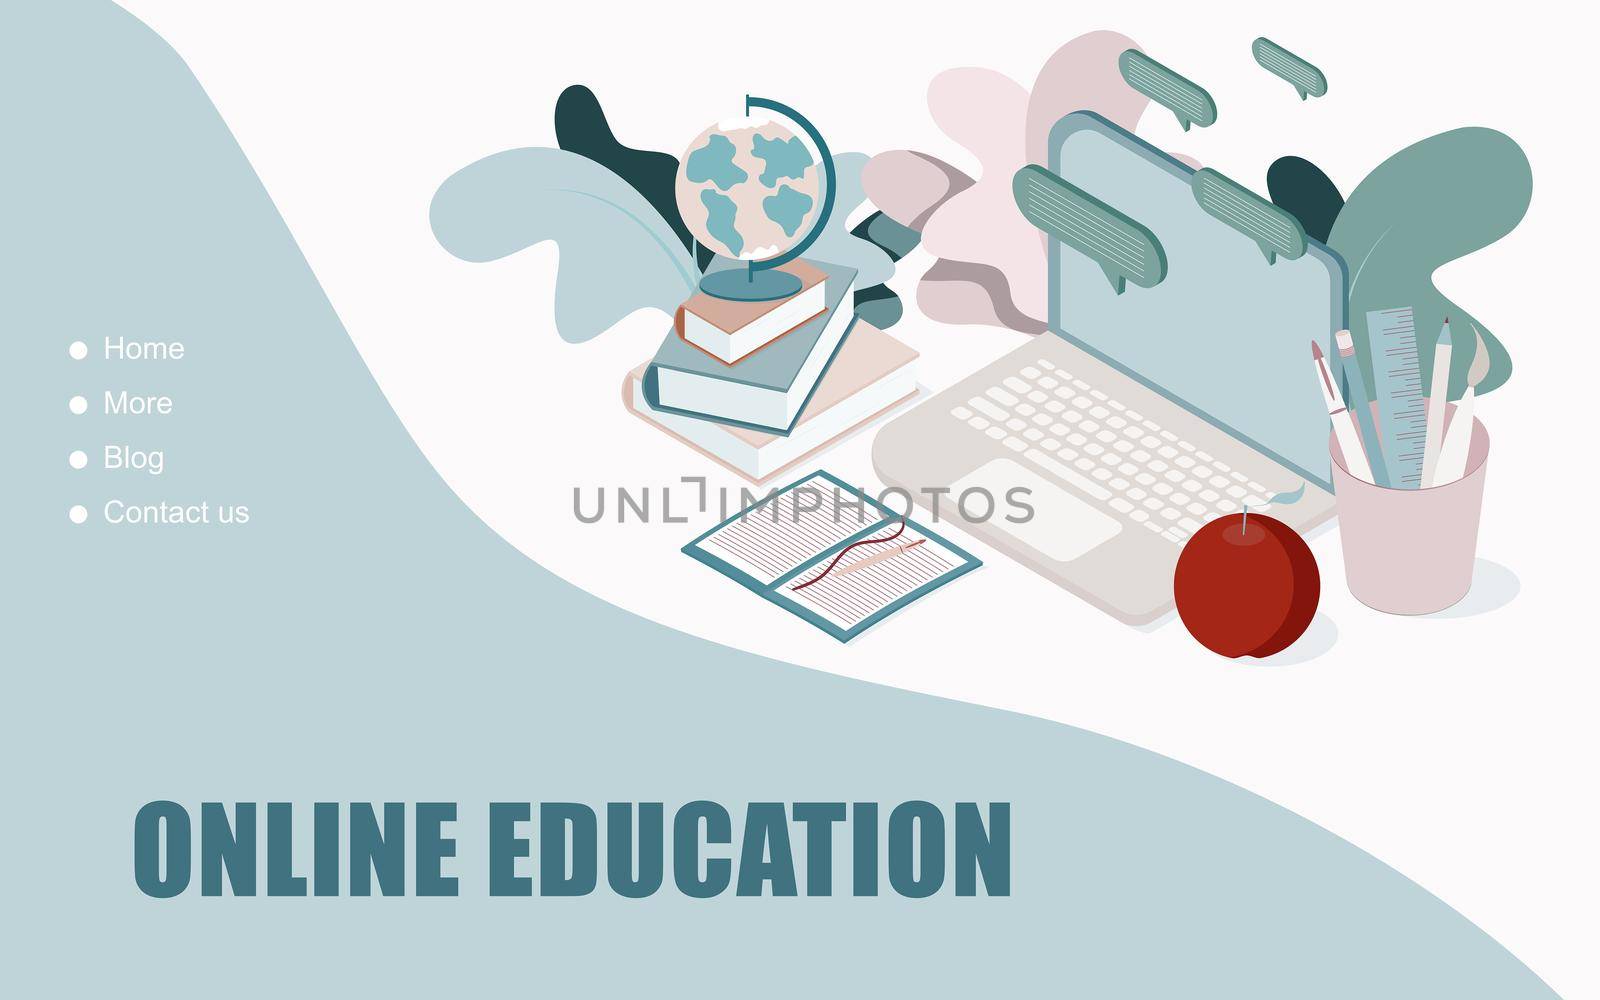 3D rendering illustration of Online education concept by Fabrikasimf